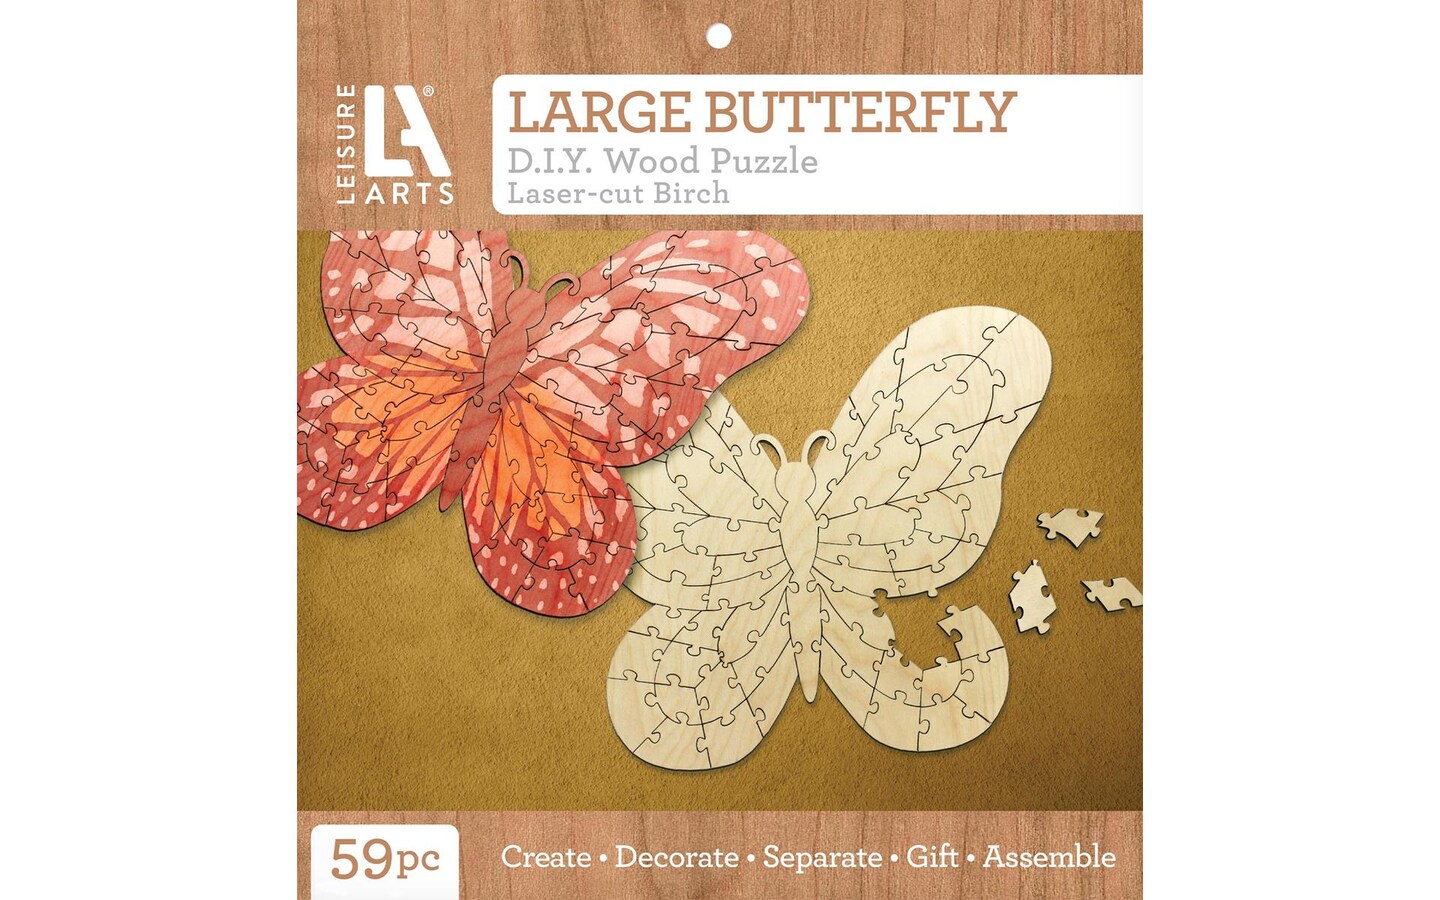 Leisure Arts Wood Puzzle Large Butterfly 59 pieces 12x 10 Blank Puzzles,  Make Your Own puzzle, Blank Puzzle Pieces Blank Wooden Puzzles DIY Jigsaw  Puzzles, blank puzzles to draw on